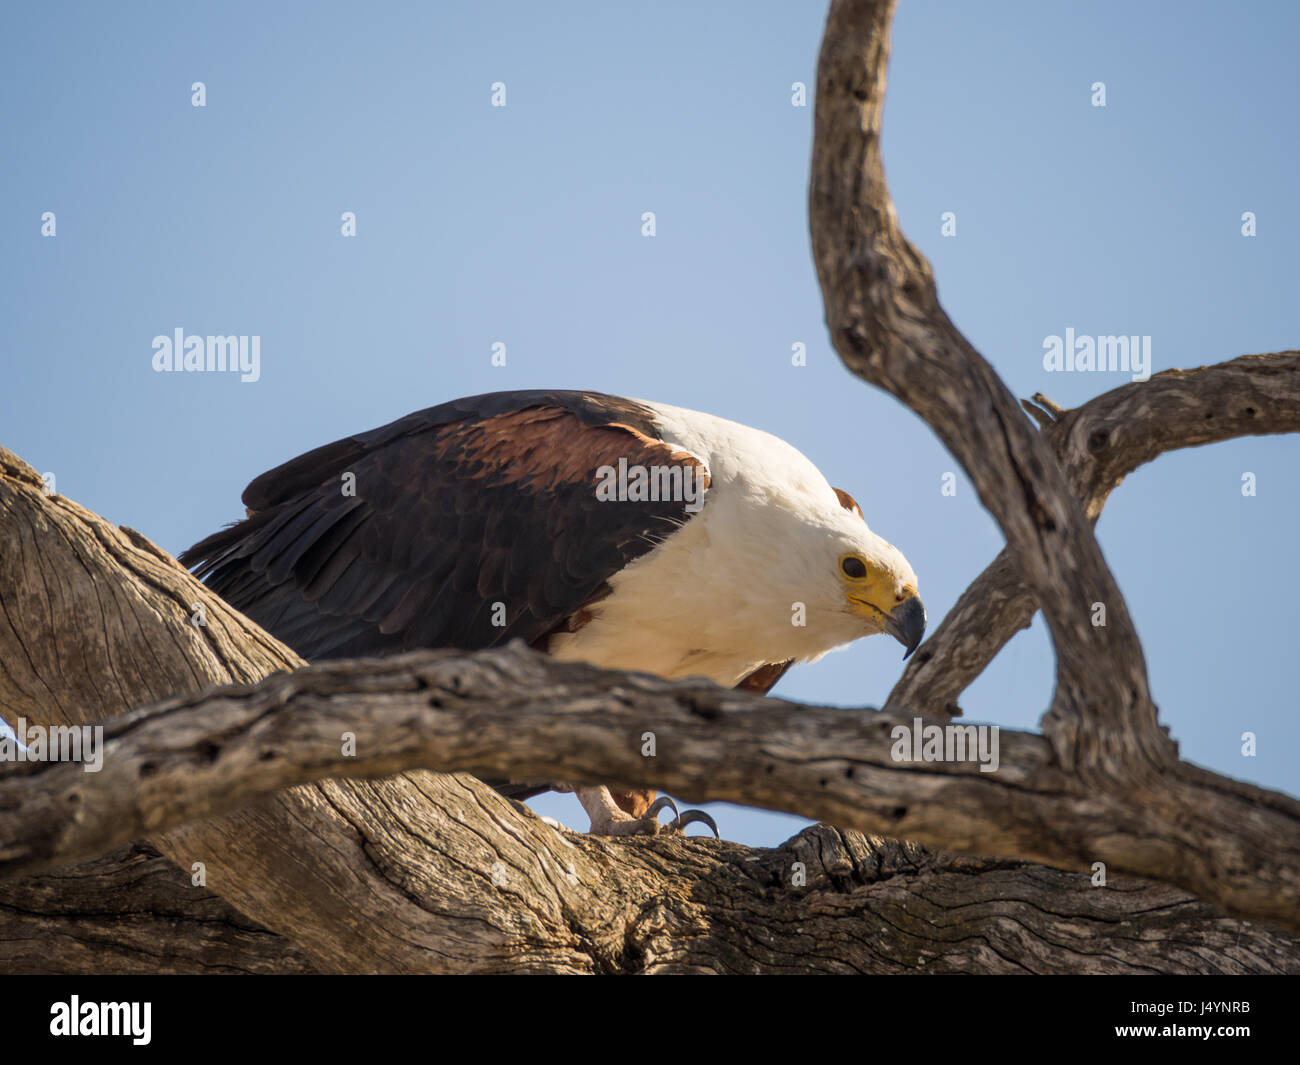 Portrait of giant African Fish Eagle sitting in dead tree, Chobe NP, Botswana, Africa. Stock Photo